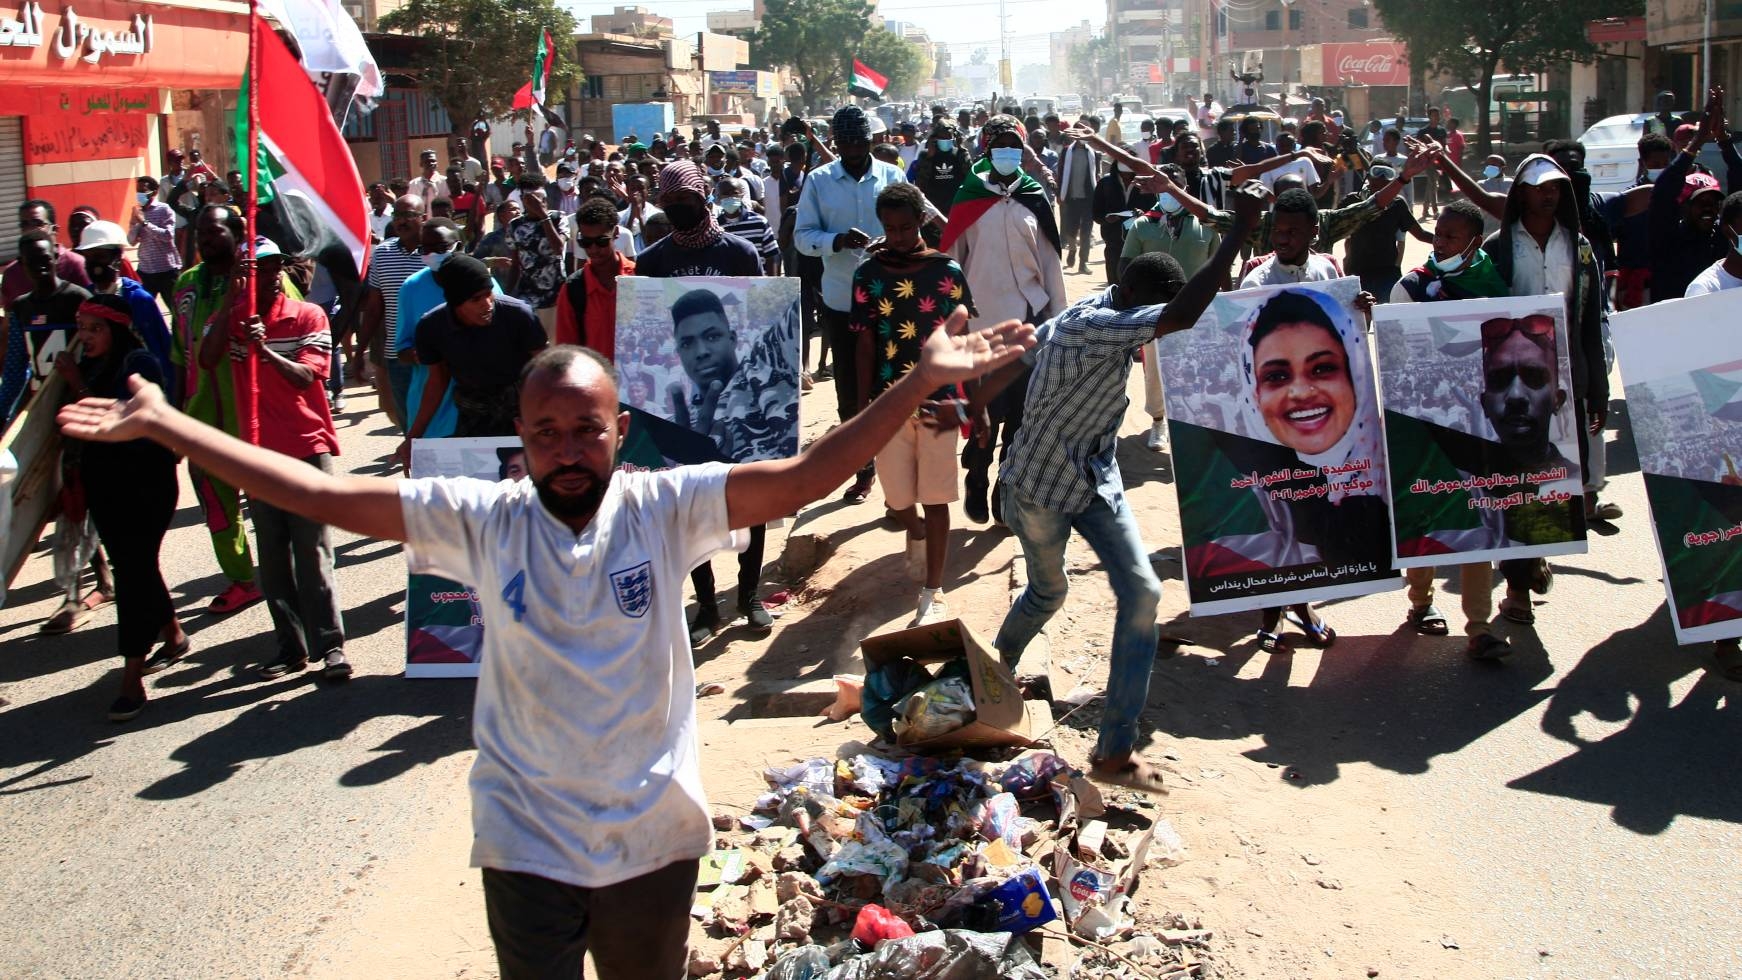 Sudanese demonstrators carry posters of killed protesters as they protest in the capital Khartoum against the army's 25 October coup, on 30 December 2021.